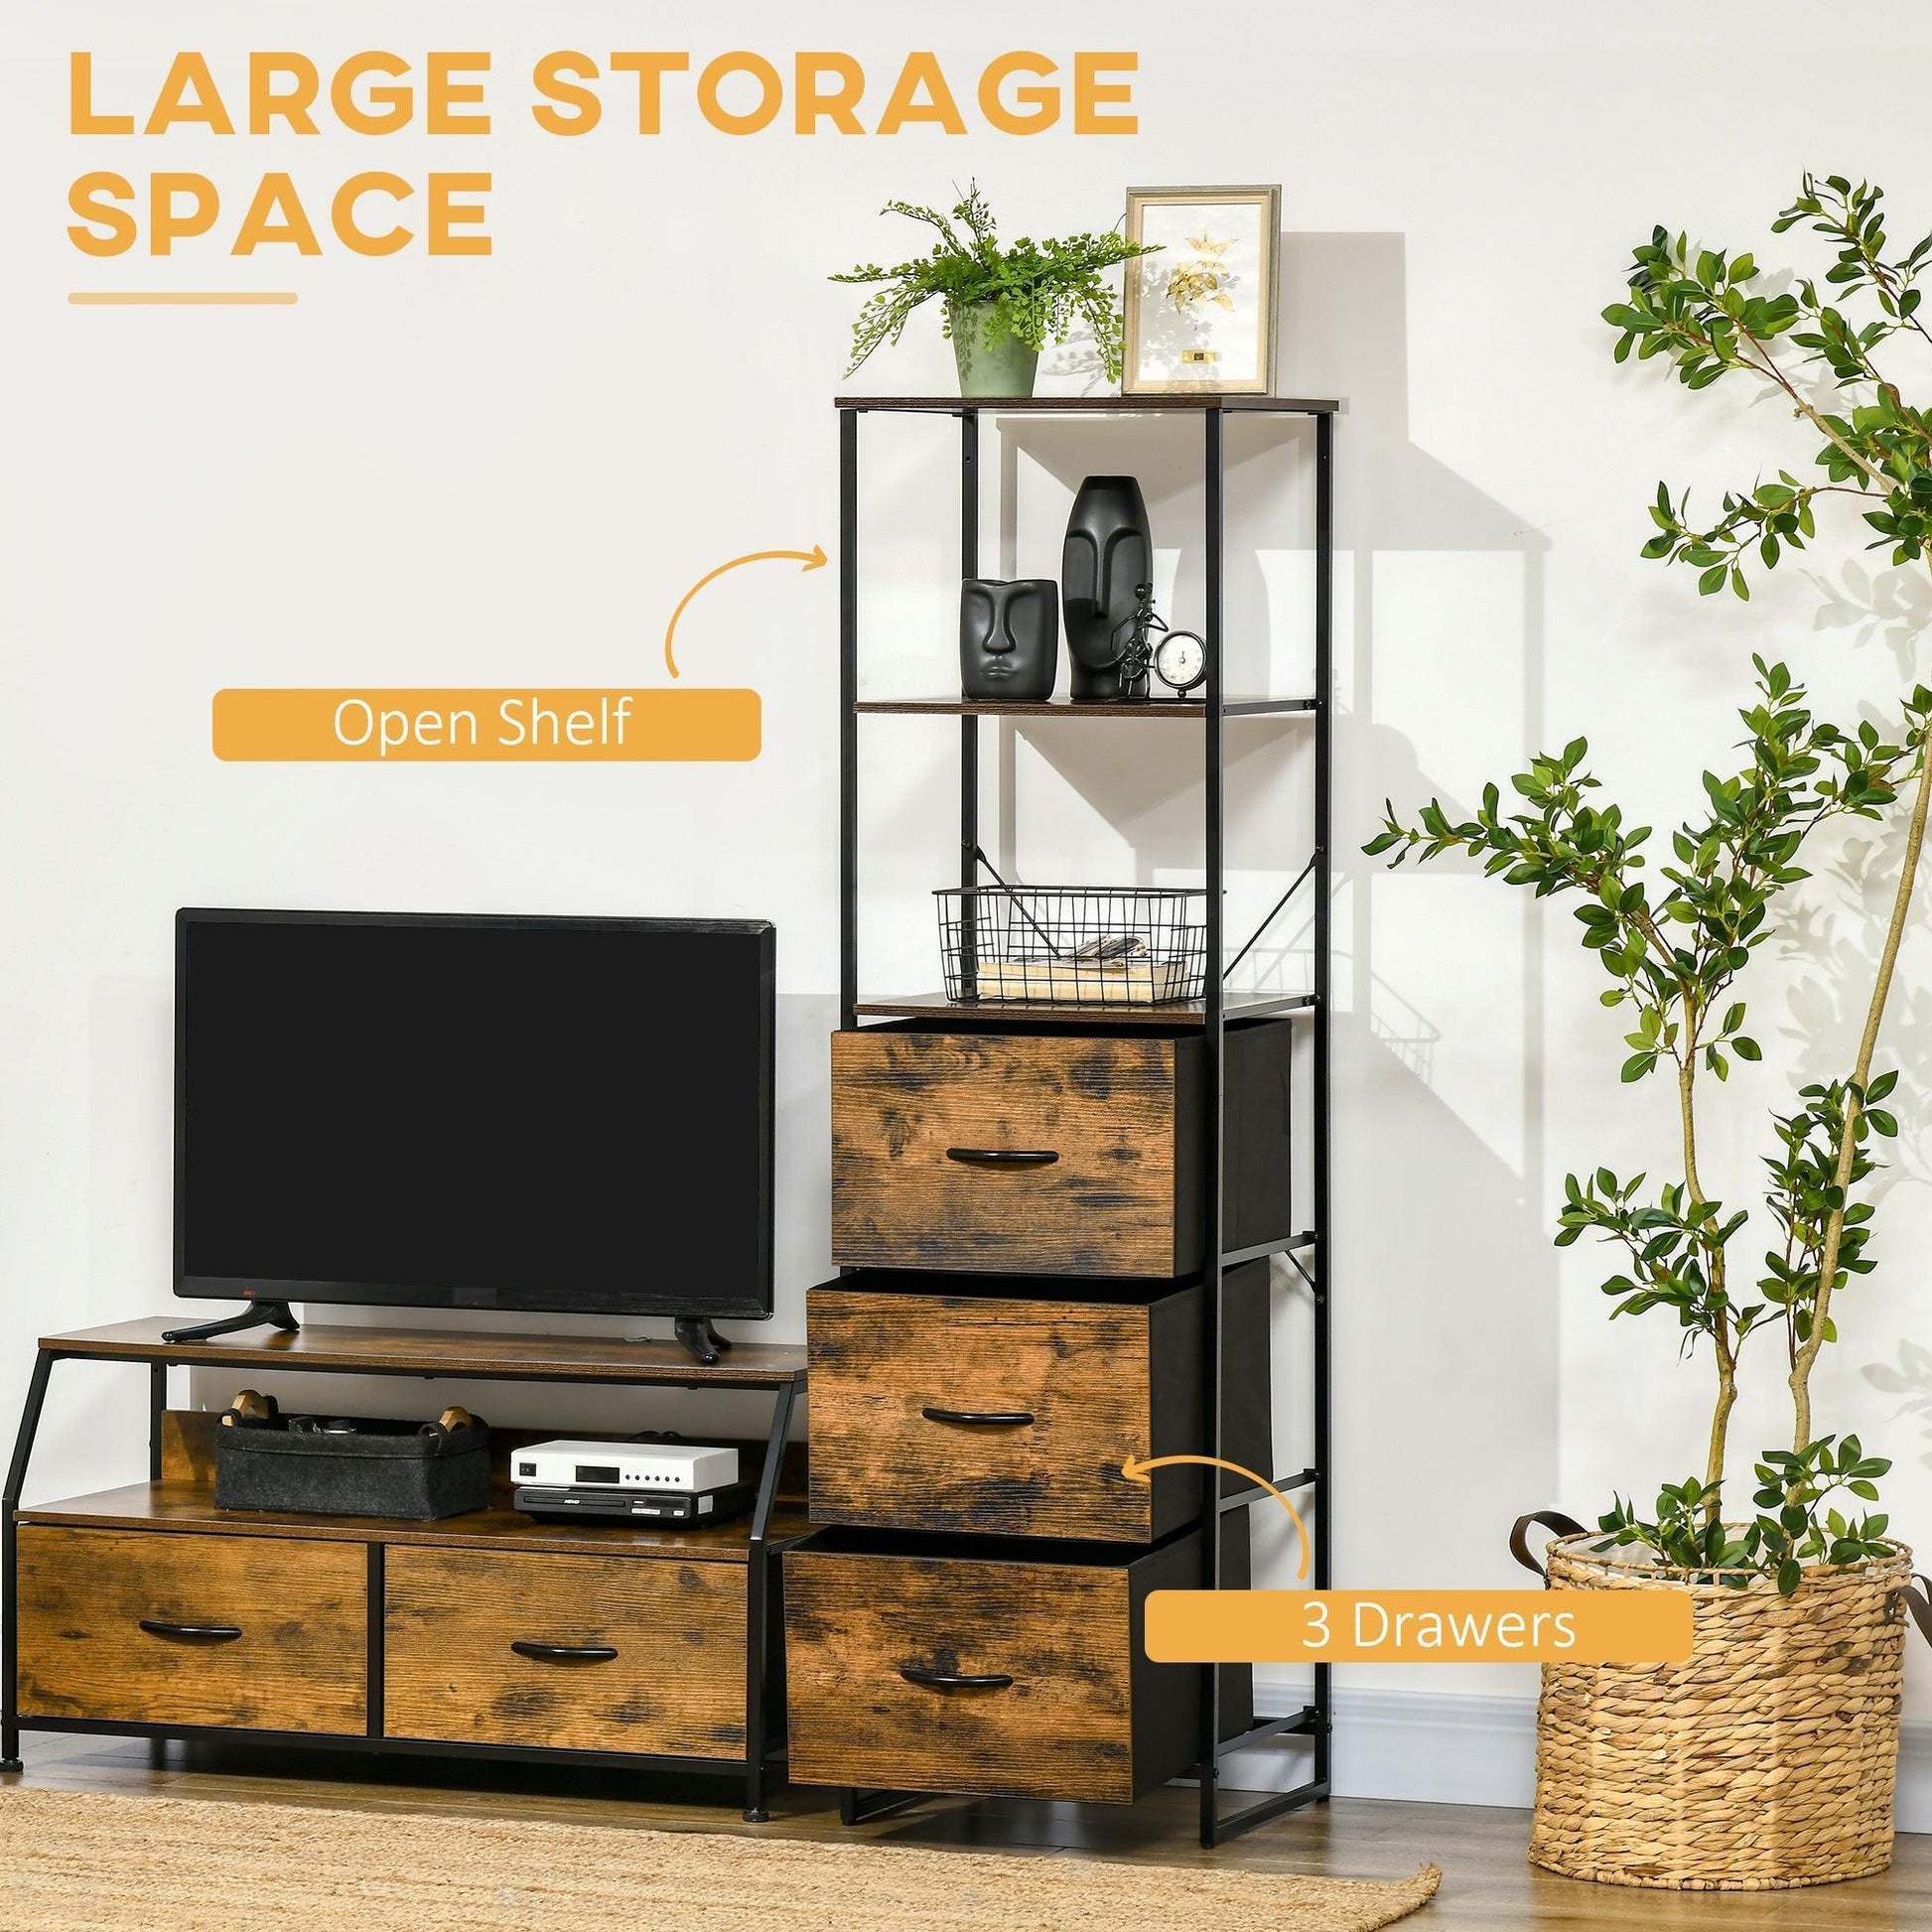 HOMCOM Industrial Bookcase with Foldable Drawers, Rustic Brown - ALL4U RETAILER LTD